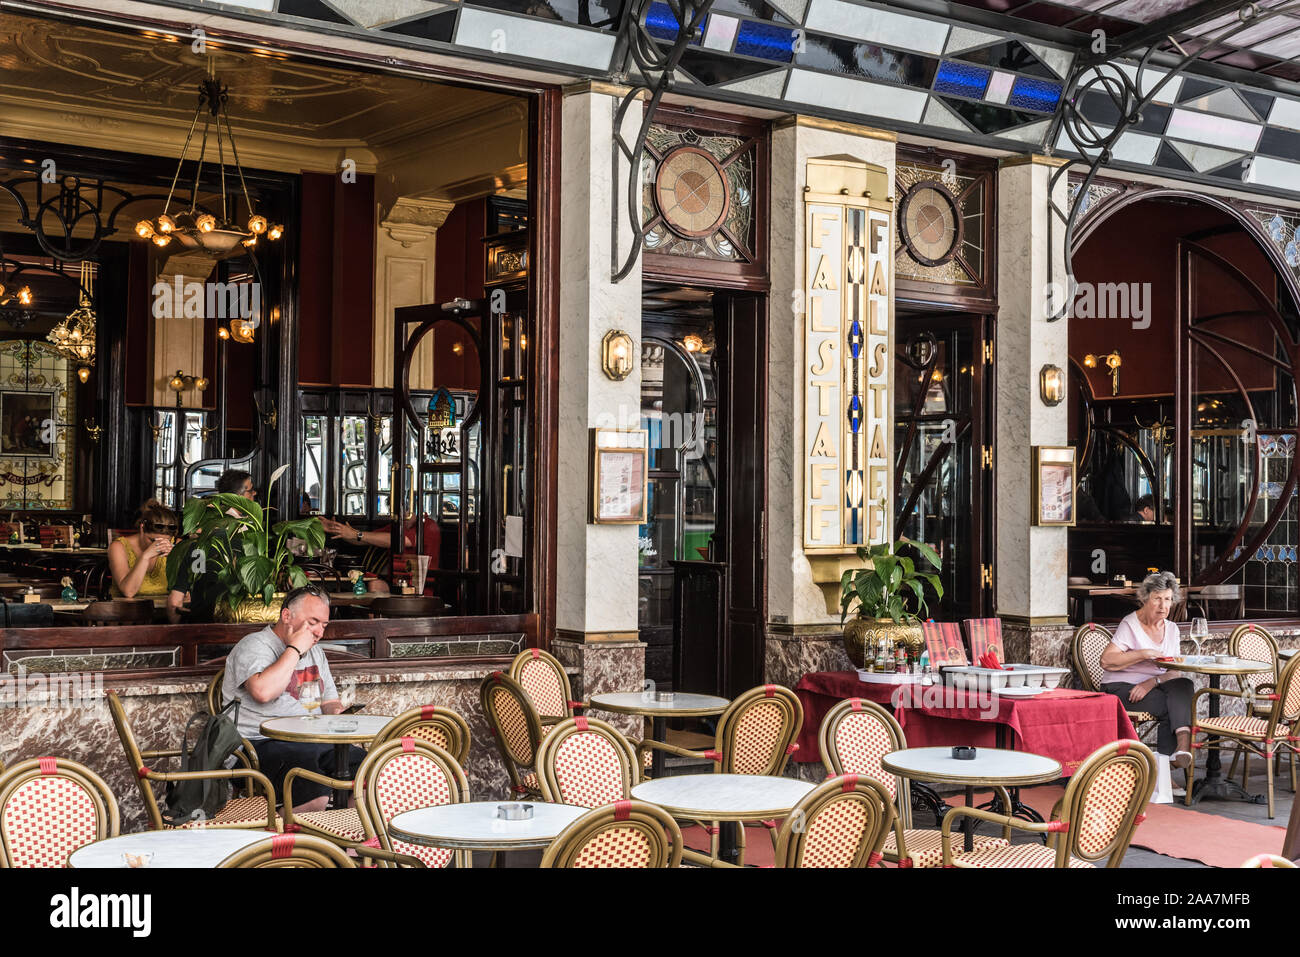 Brussels Old Town / Belgium - 06 25 2019: Art nouveau terrace of the Le Falstaff typical brasserie with glass and steel decorations Stock Photo